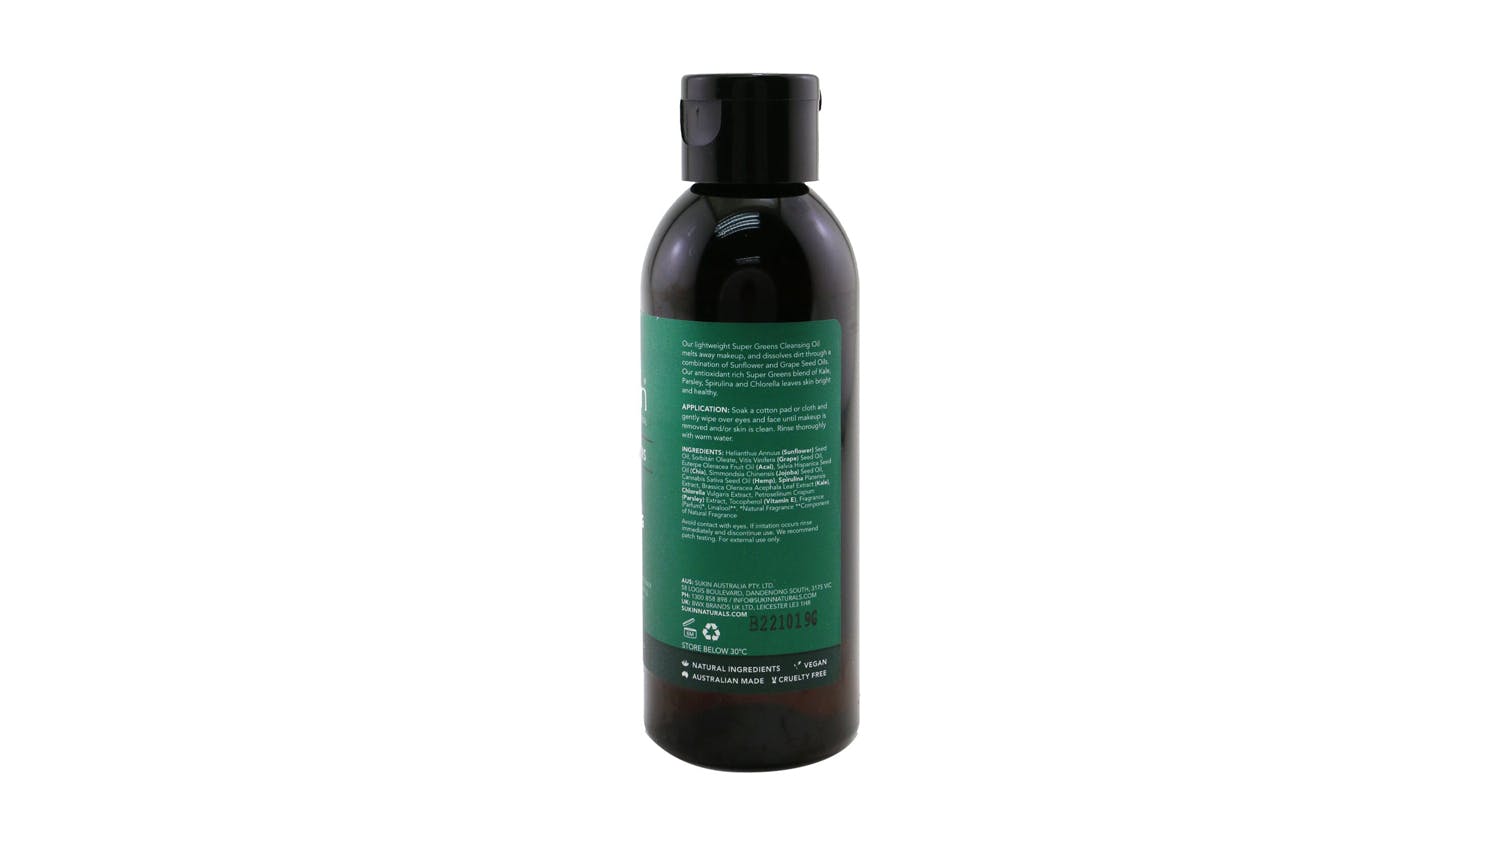 Super Greens Cleansing Oil (All Skin Types) - 125ml/4.23oz